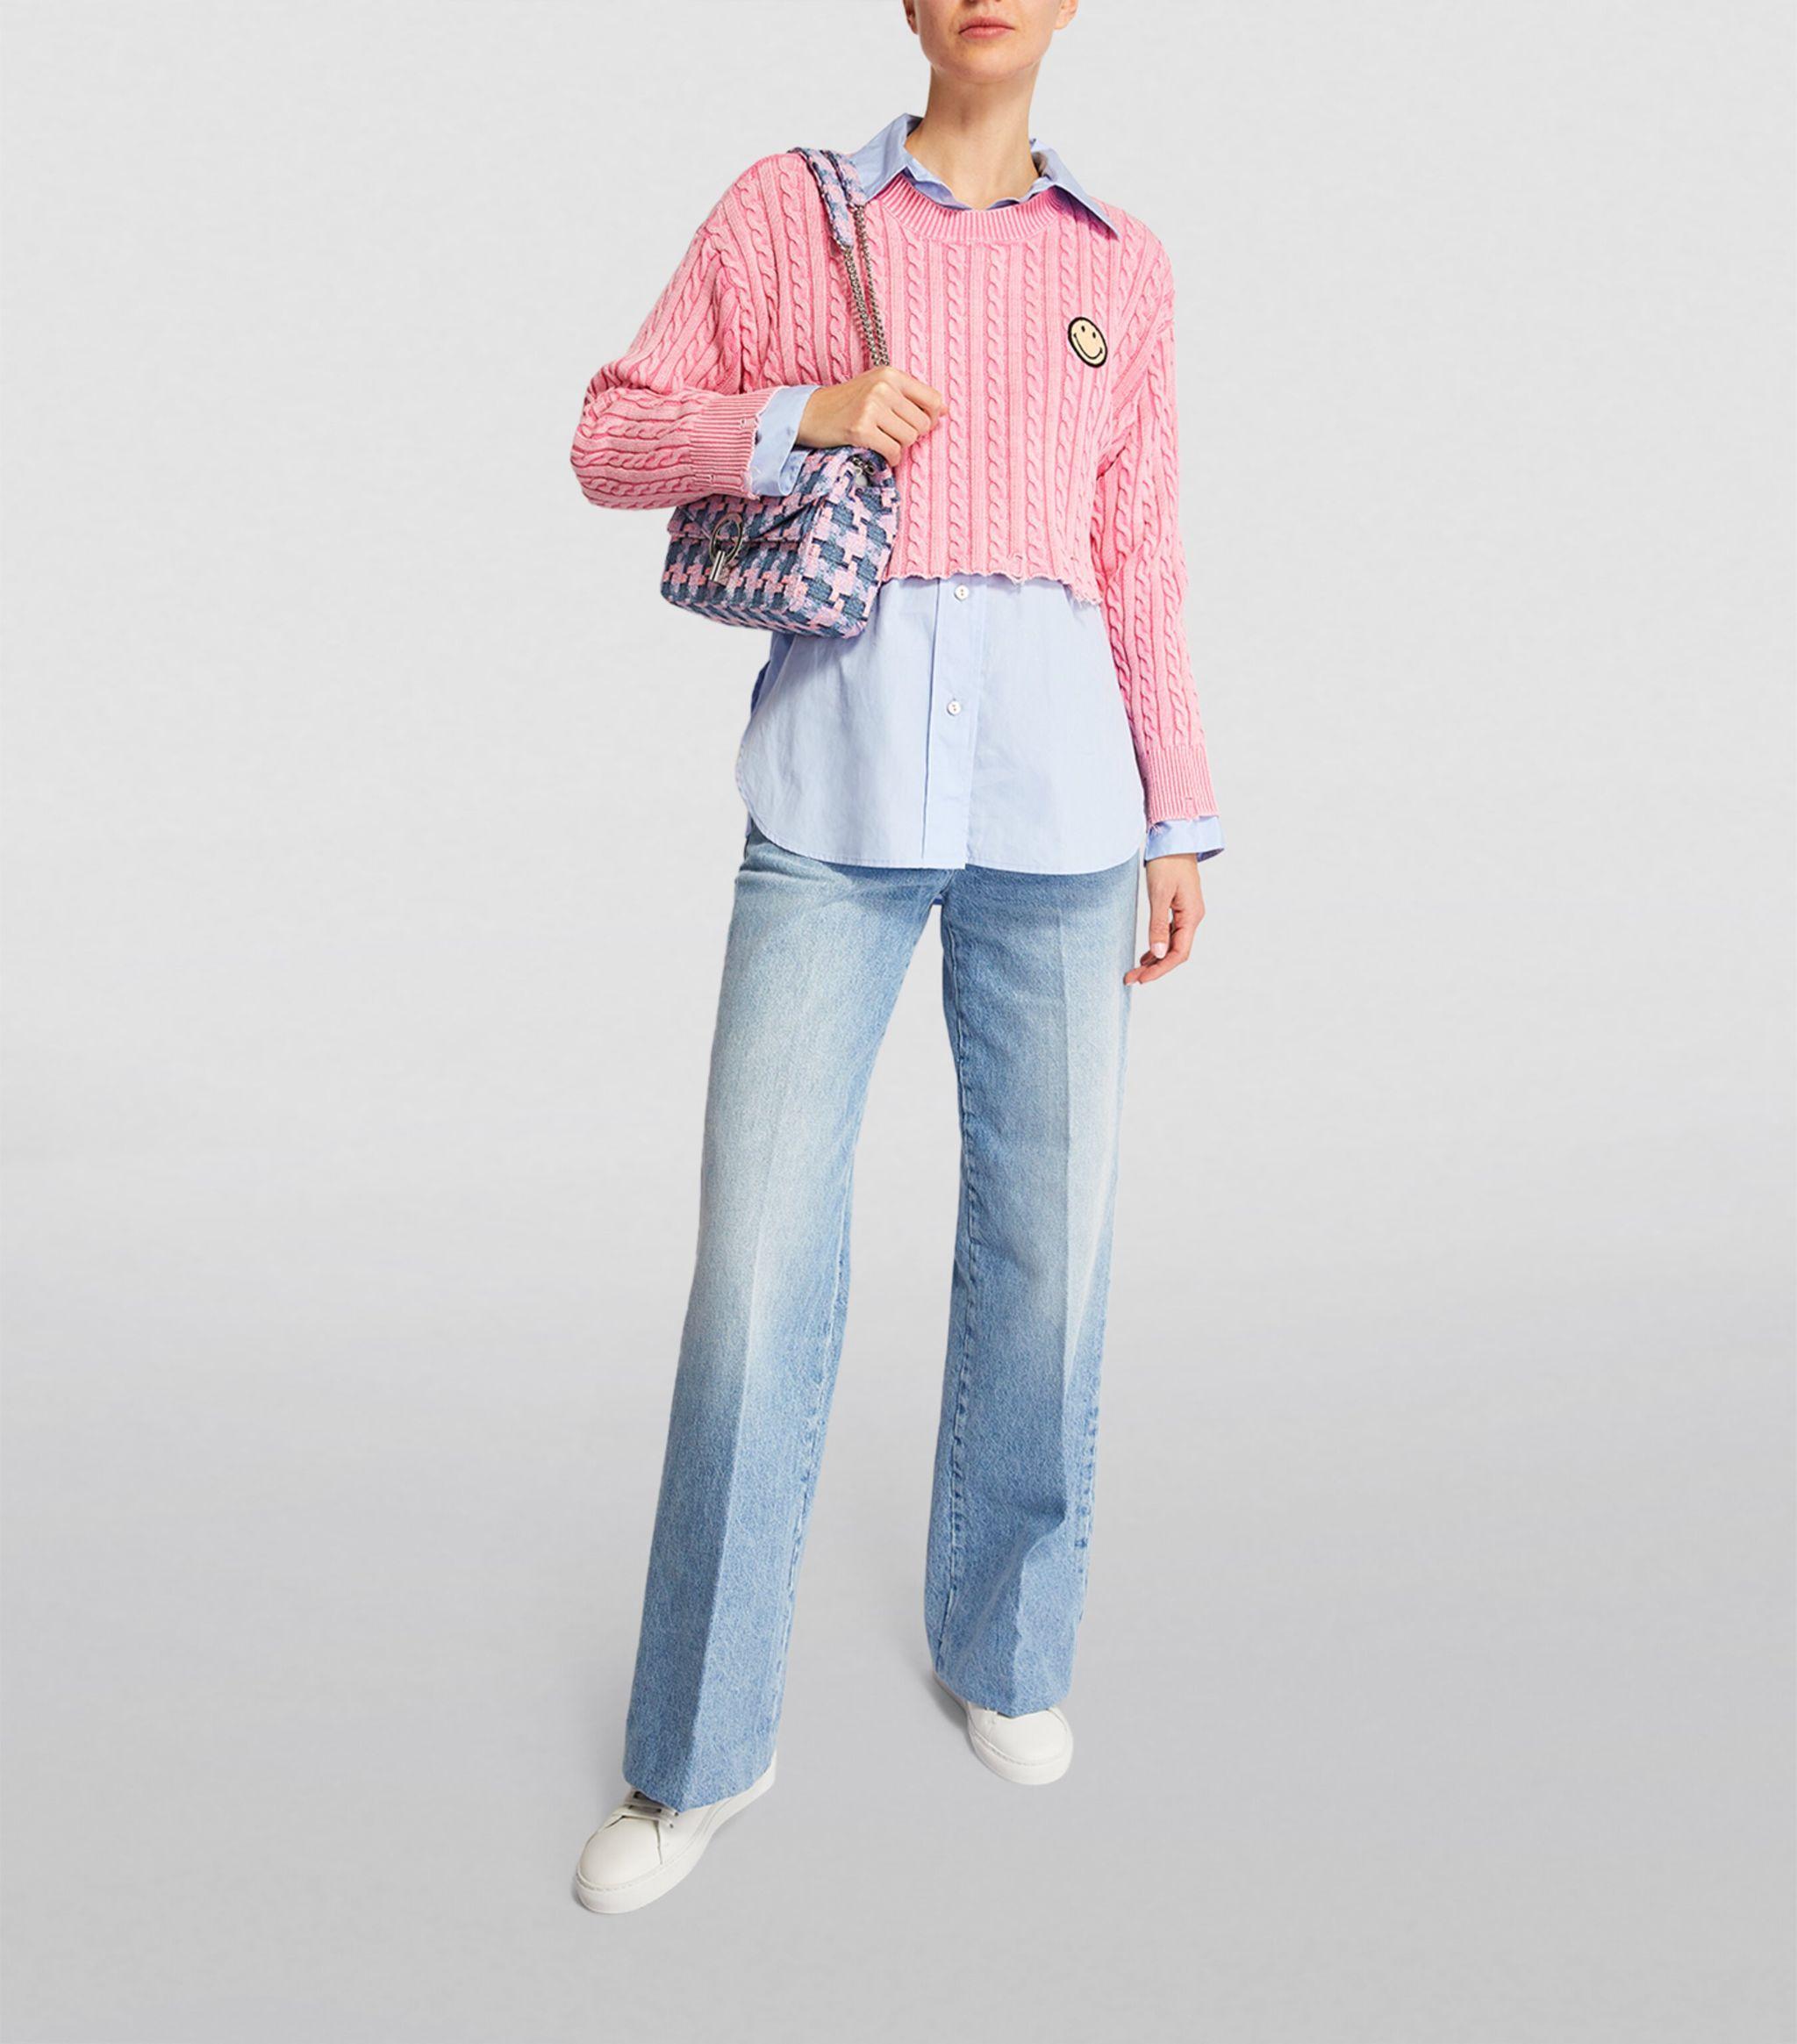 Sandro Cropped Smiley Sweater in Pink | Lyst